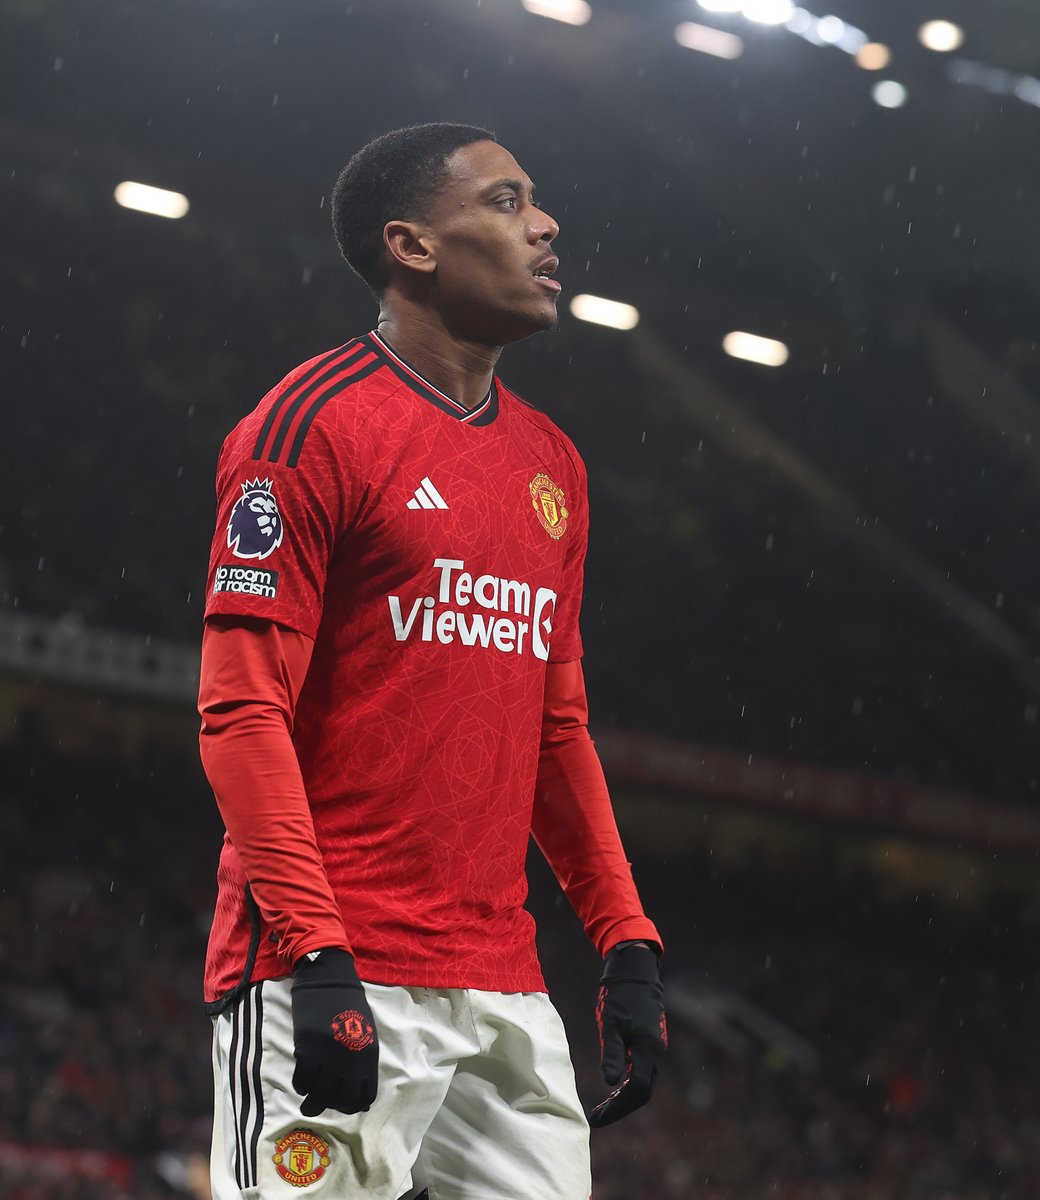 Anthony Martial's agent Philippe Lamboley: 'Anthony will not leave [#mufc this month] and will stay until his contract ends in June.' [@SkySportsNews]